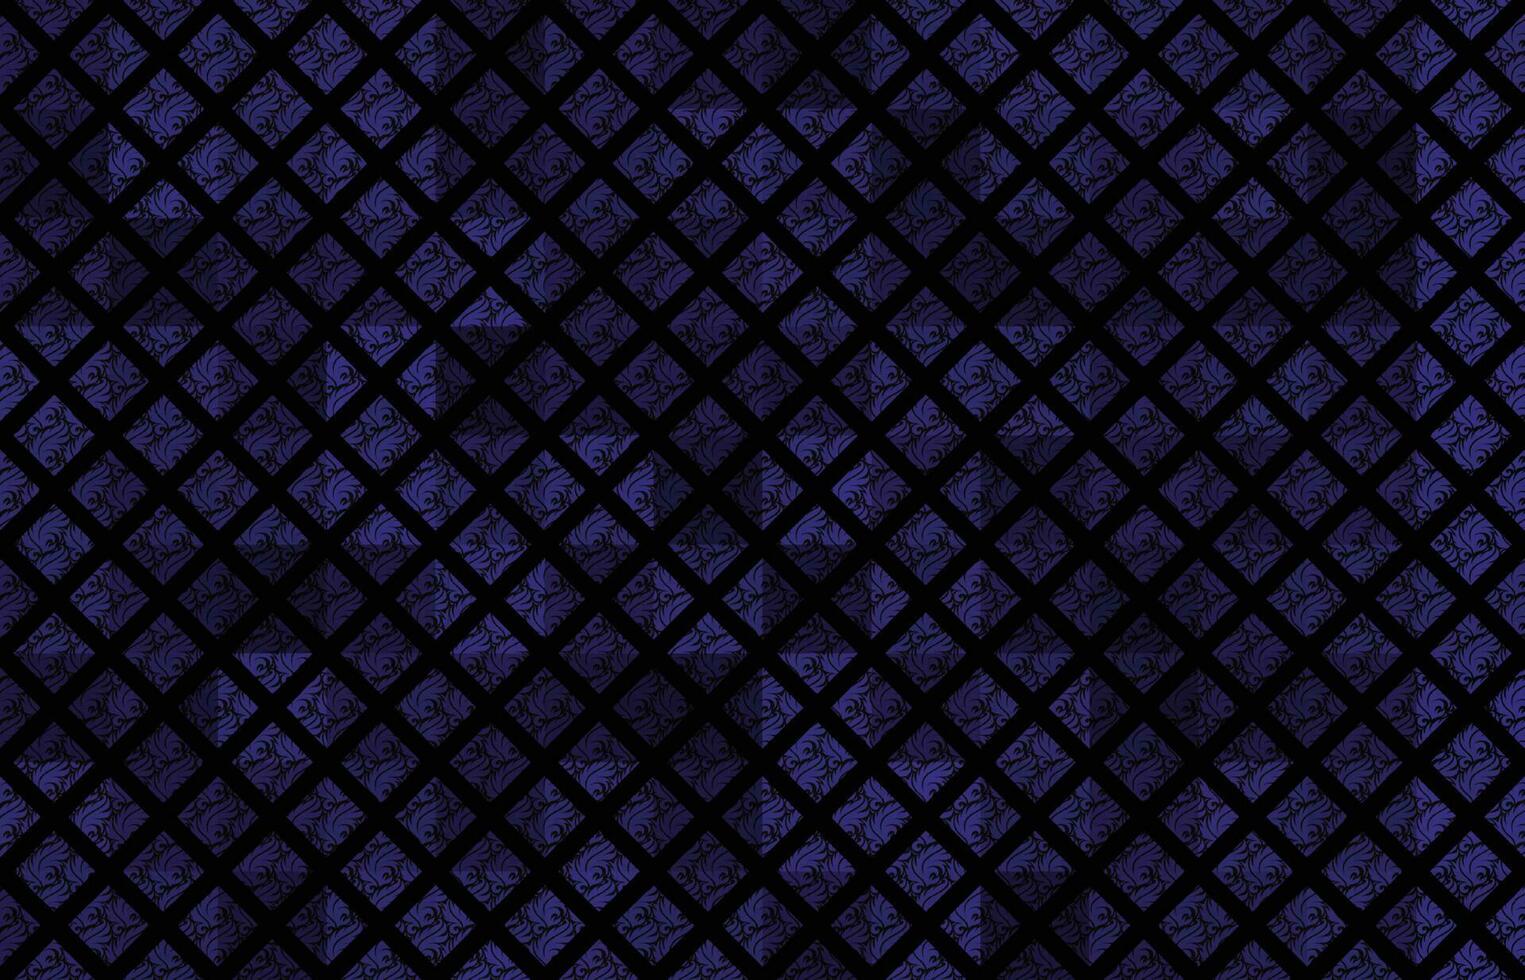 Navy Blue with Dark Grunge Style Geometric Square Filled Abstract Seamless pattern  for Wallpaper design, Textile design, Website background, Stationery design, Product packaging vector